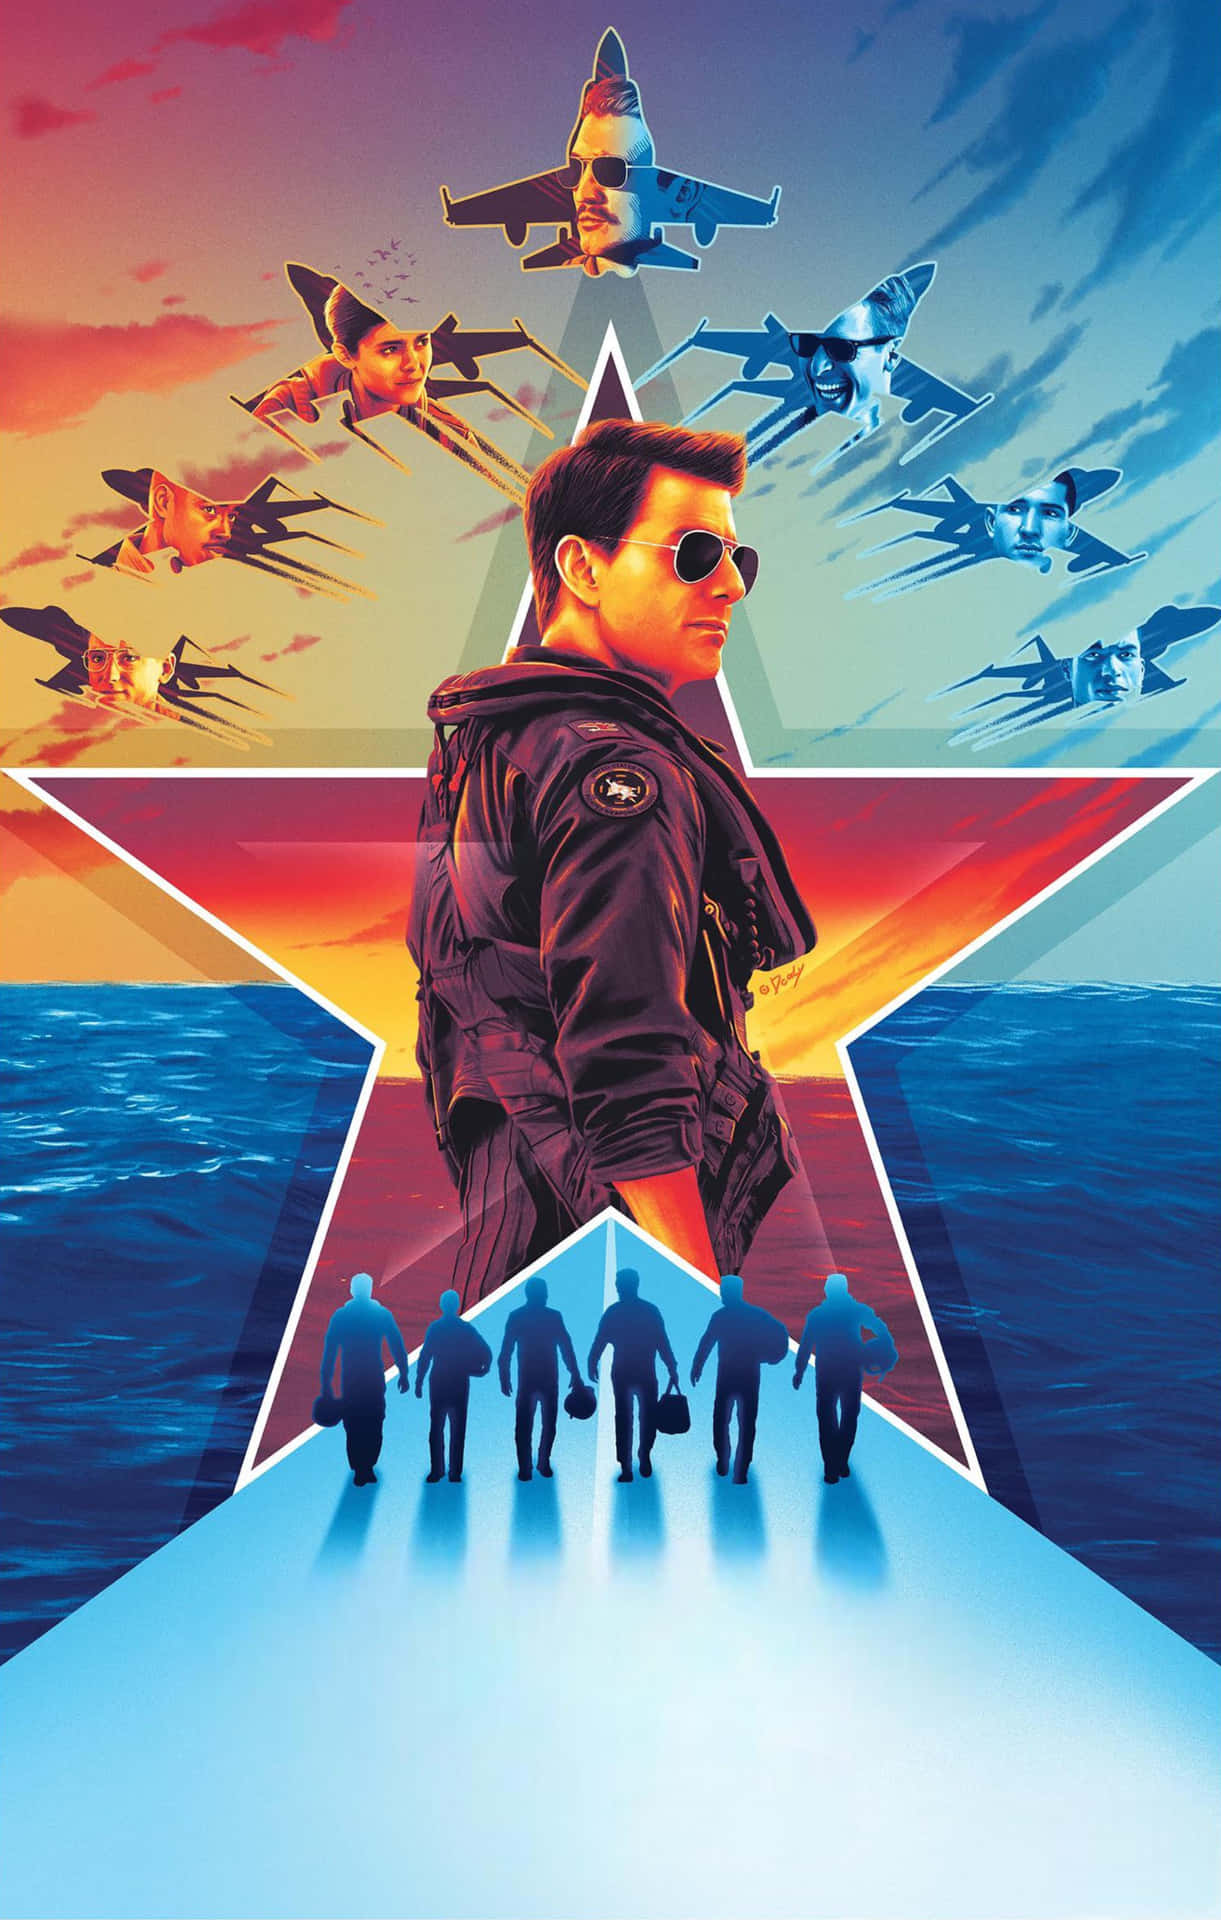 Cruise through the skies with the Top Gun